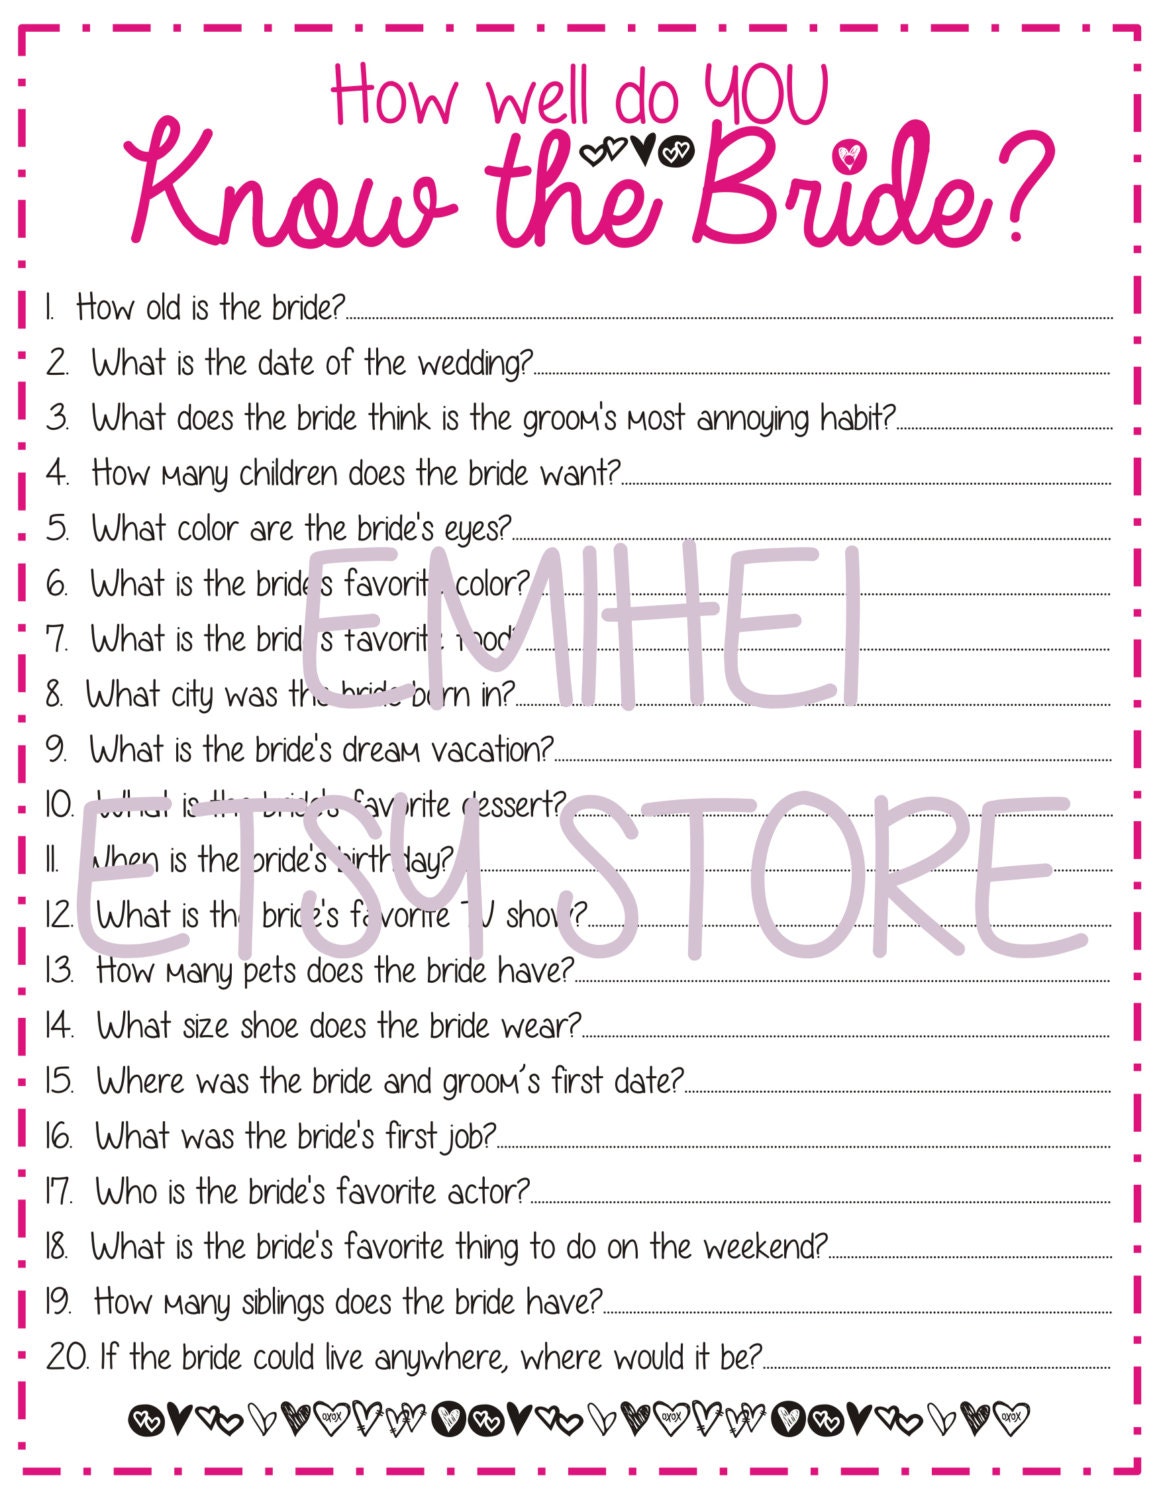 how-well-do-you-know-the-bride-printable